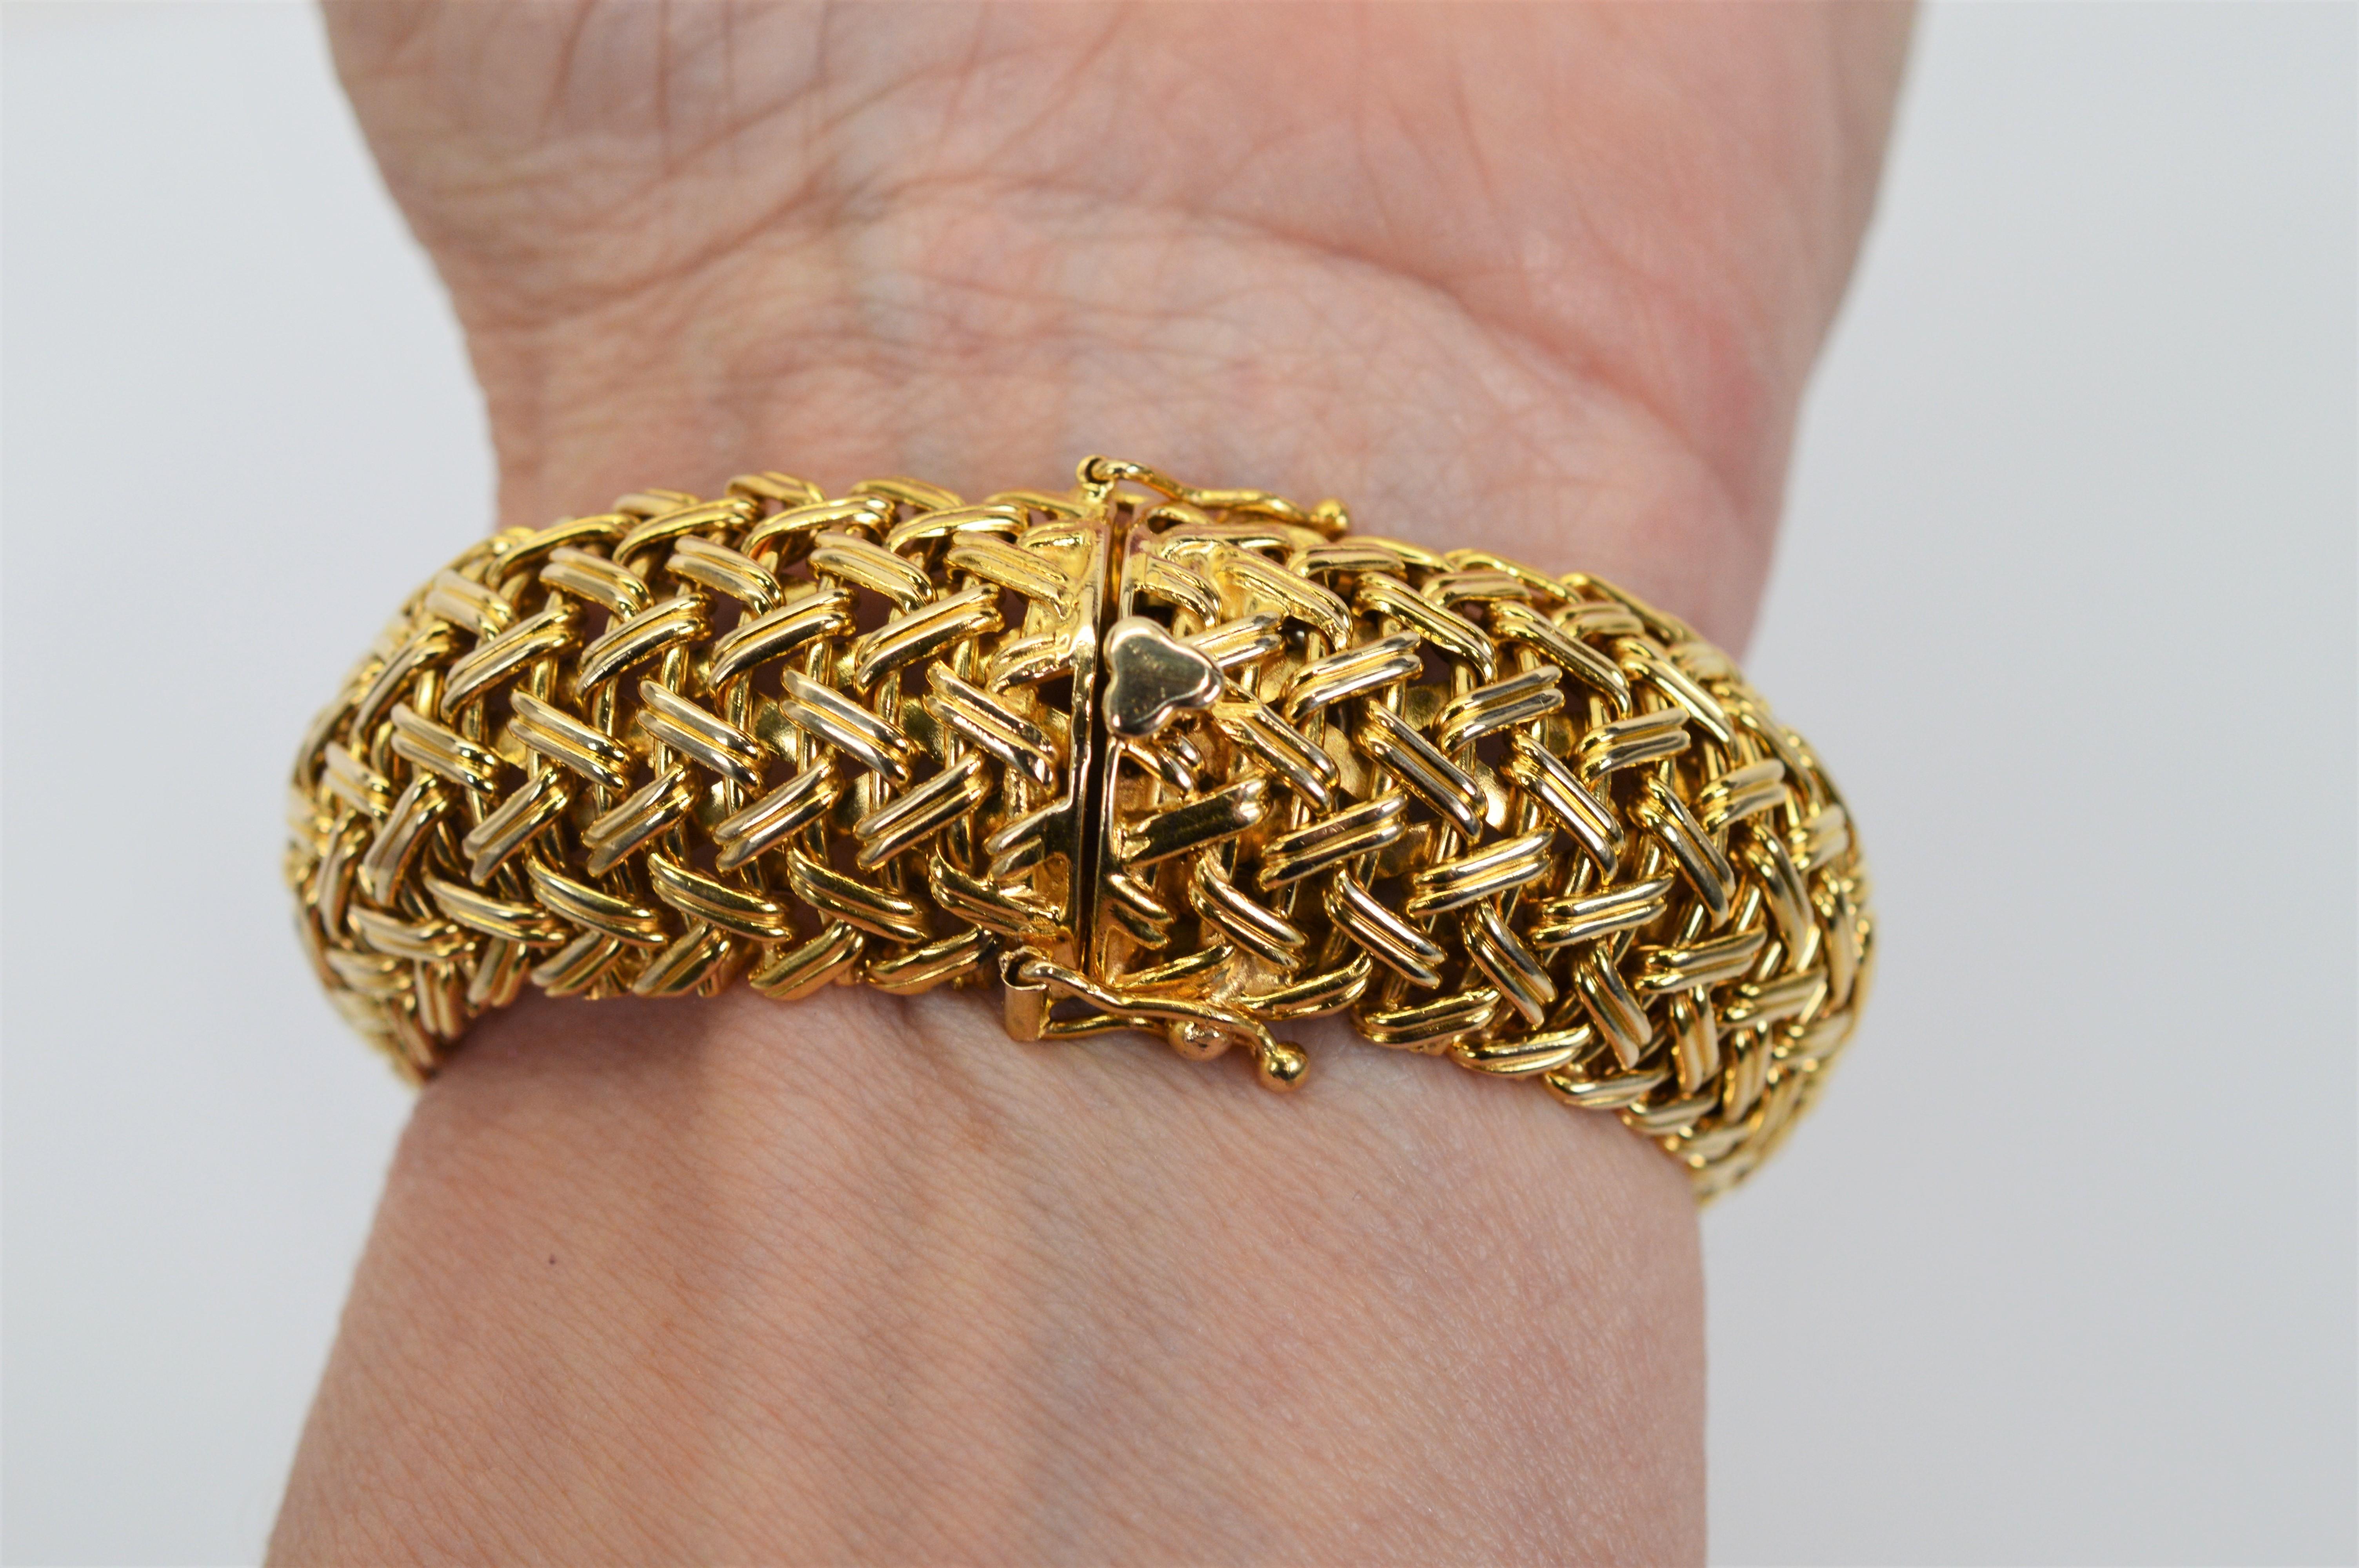 Retro Style Contoured Woven 14 Karat Yellow Gold Bracelet In Excellent Condition For Sale In Mount Kisco, NY